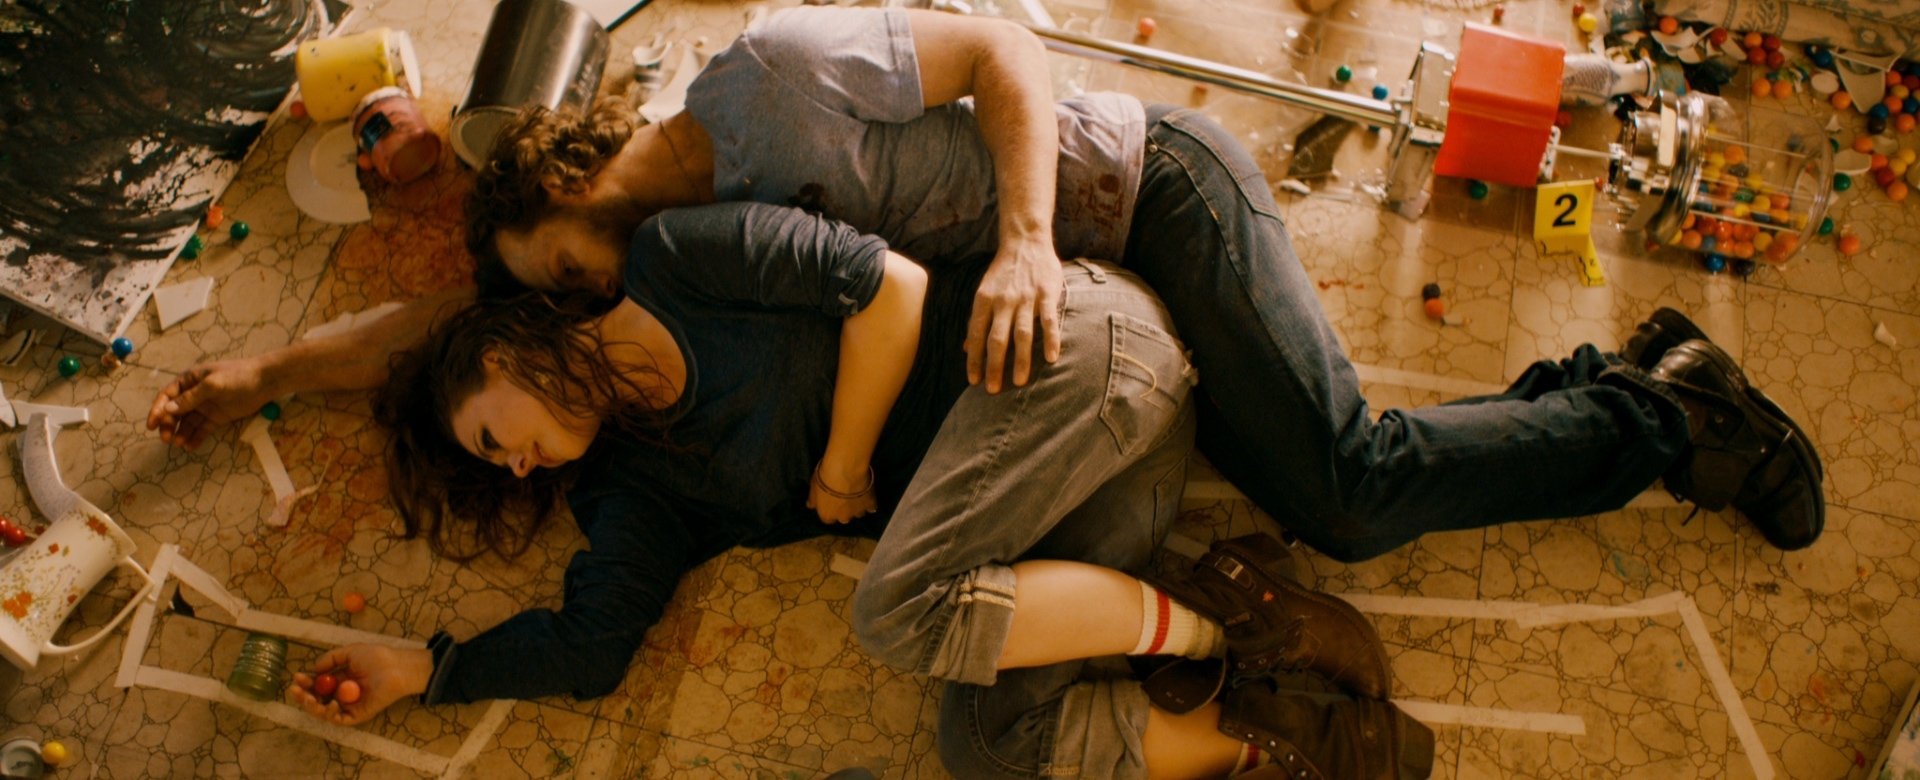 Still of Katharine Isabelle and Kyle Schmid in 88.